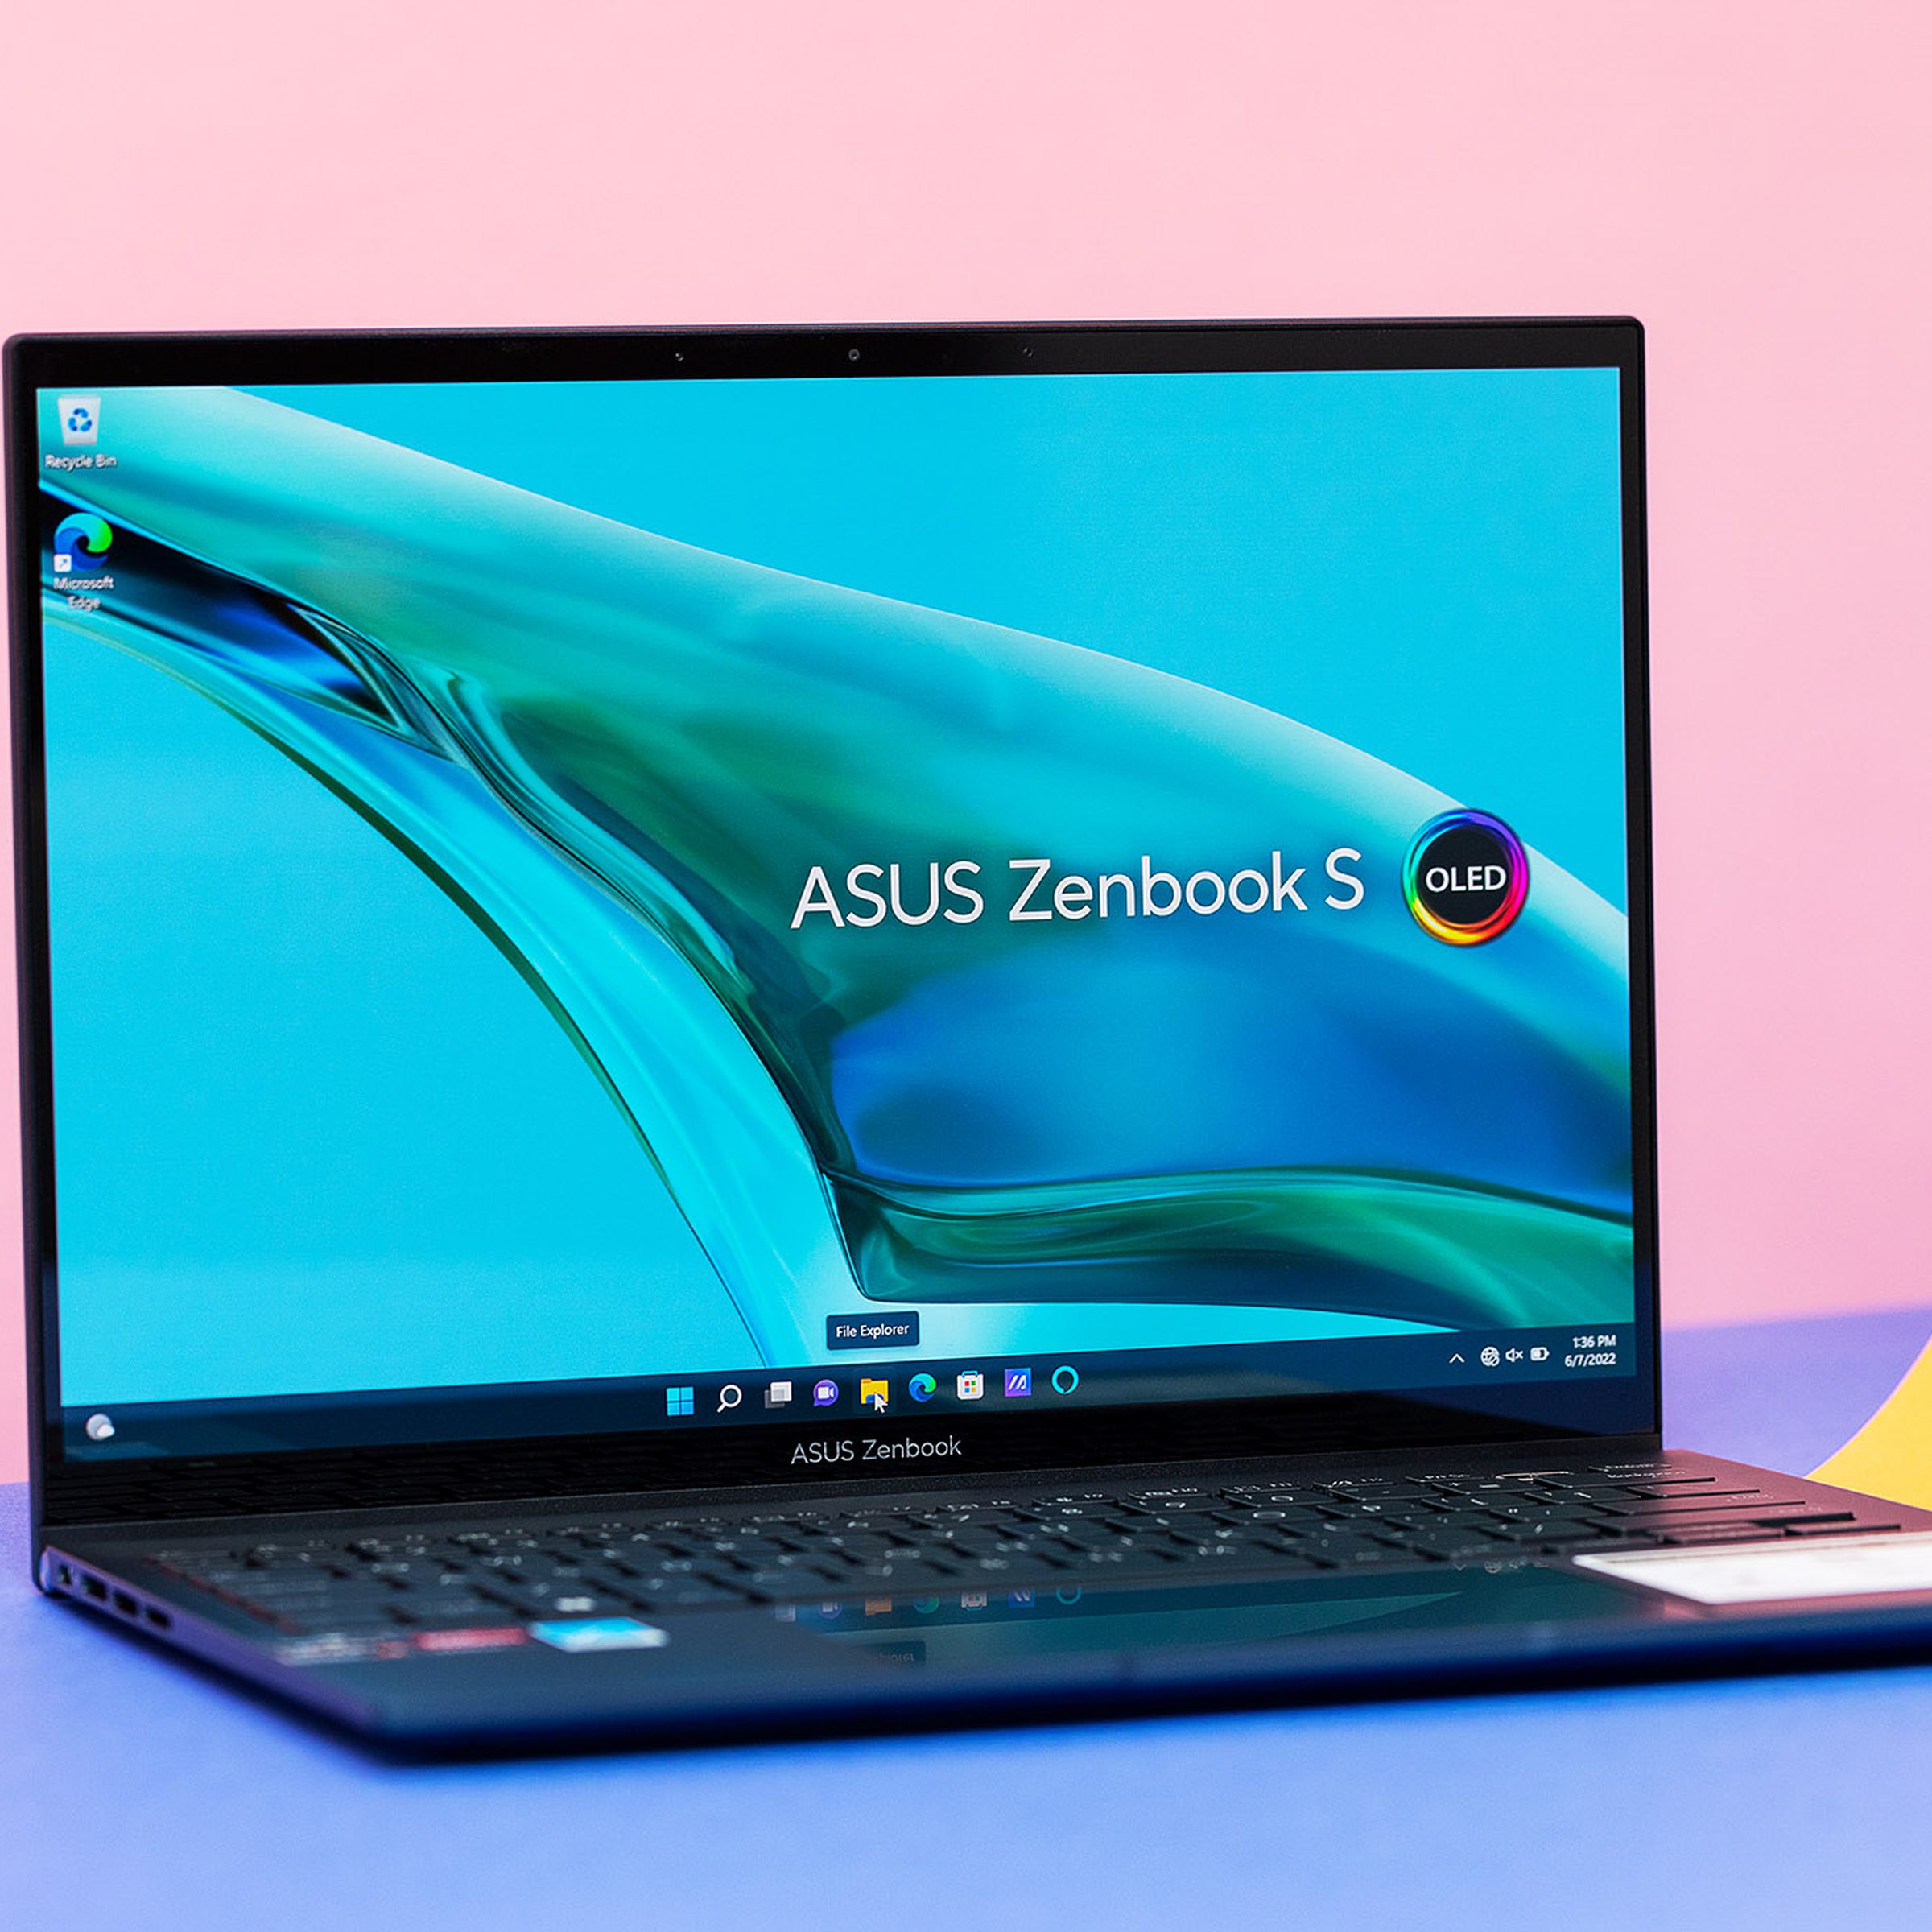 The Asus Zenbook S 13 OLED on a blue and pink background. The screen displays a stream of water on a blue background with the Asus Zenbook S OLED logo.